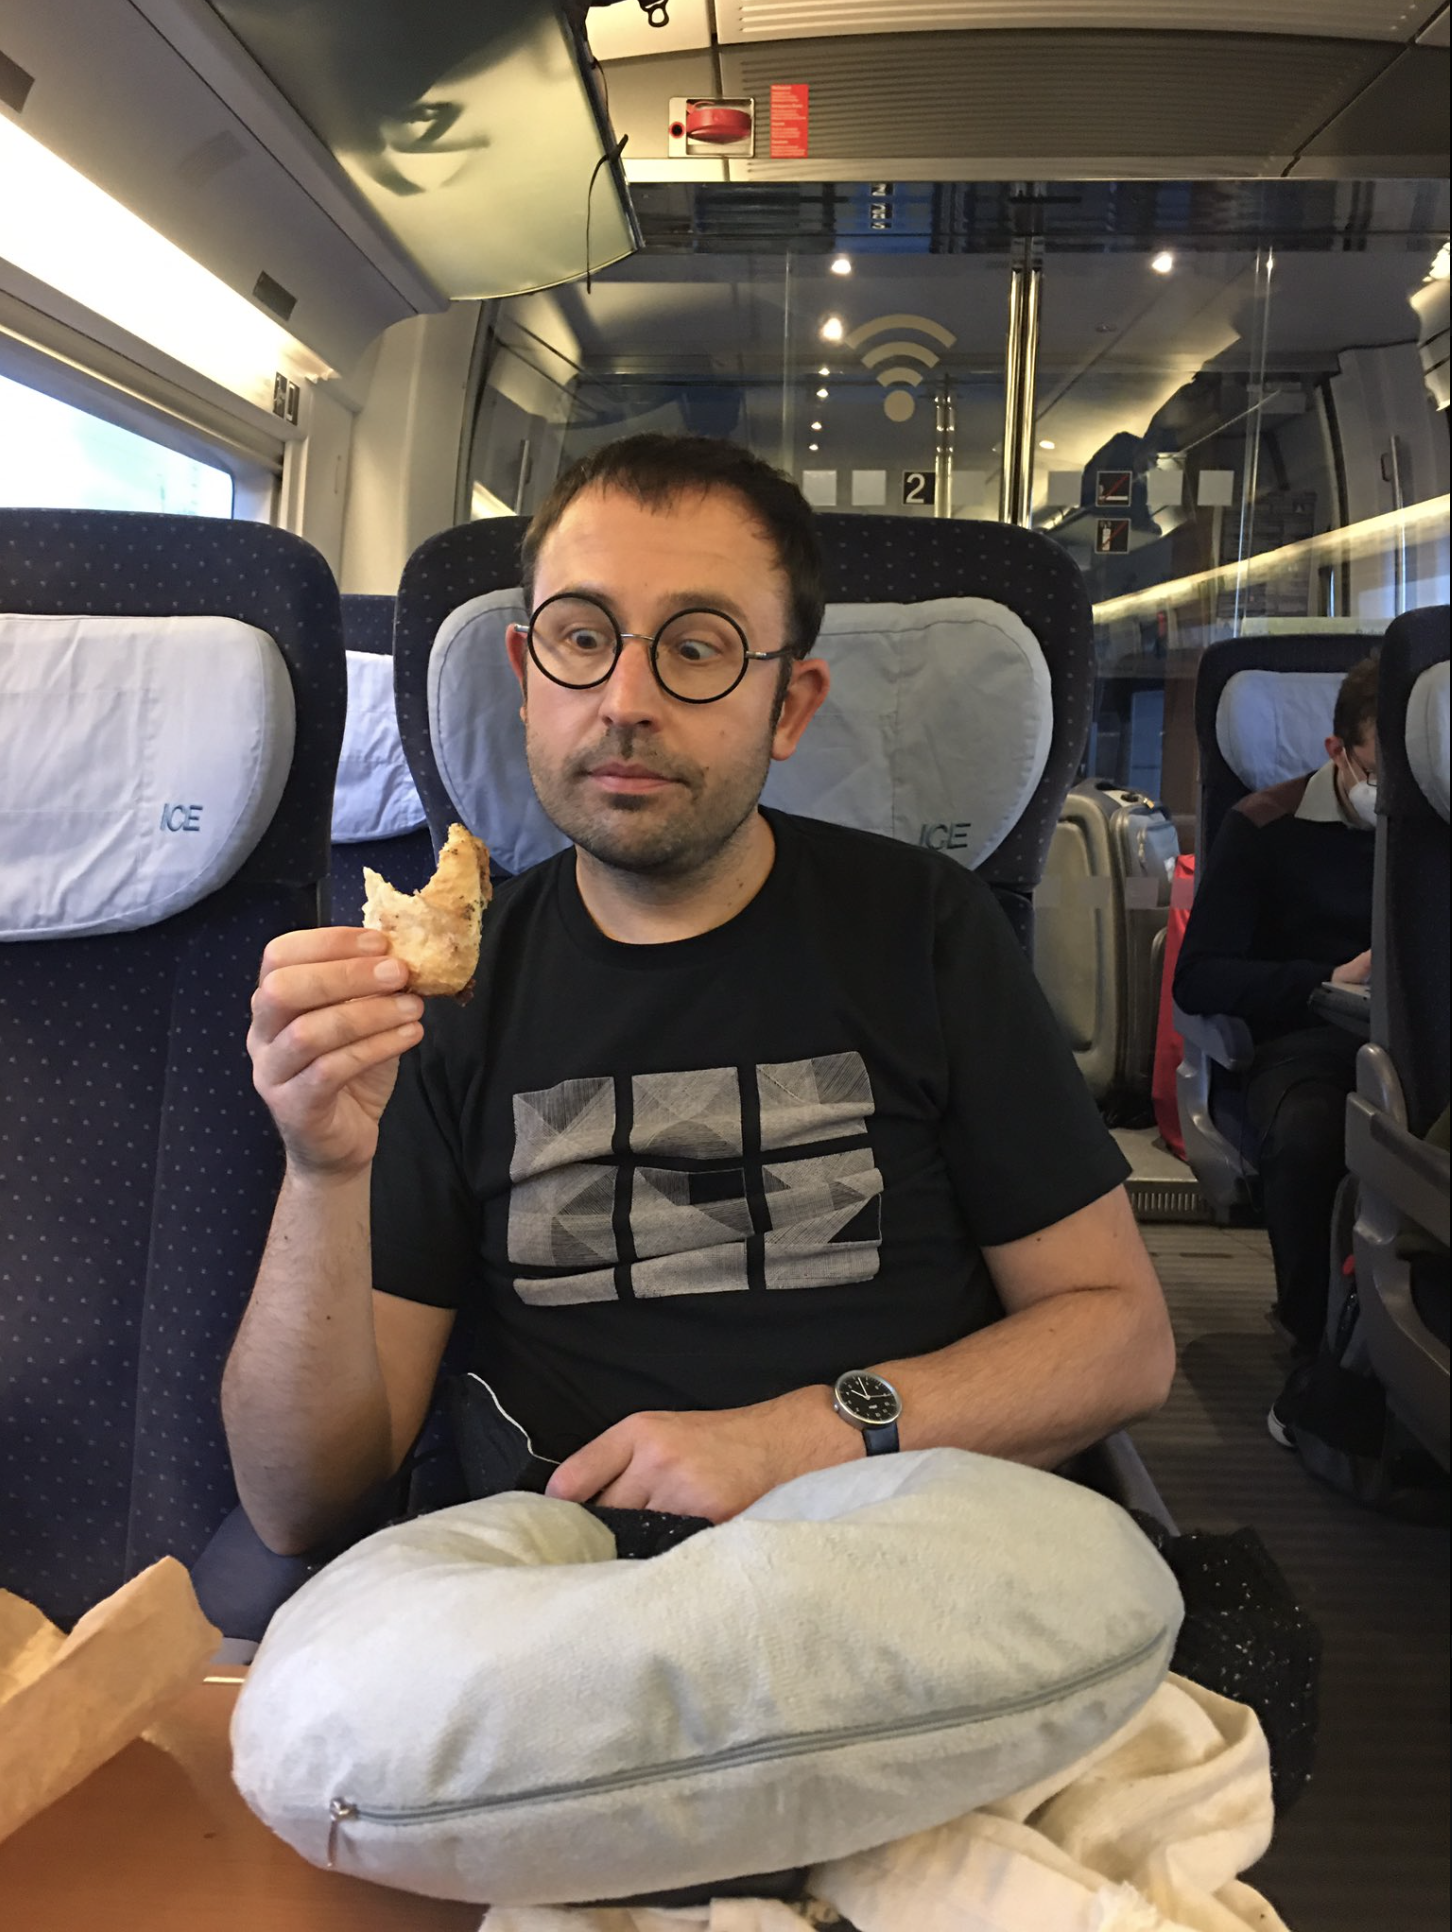 A white man in his 40s, wearing a black t shirt and black glasses is sitting on the seat of a train, looking at a pastry that he is half way through eating. In front of him on the table is a grey neck pillow